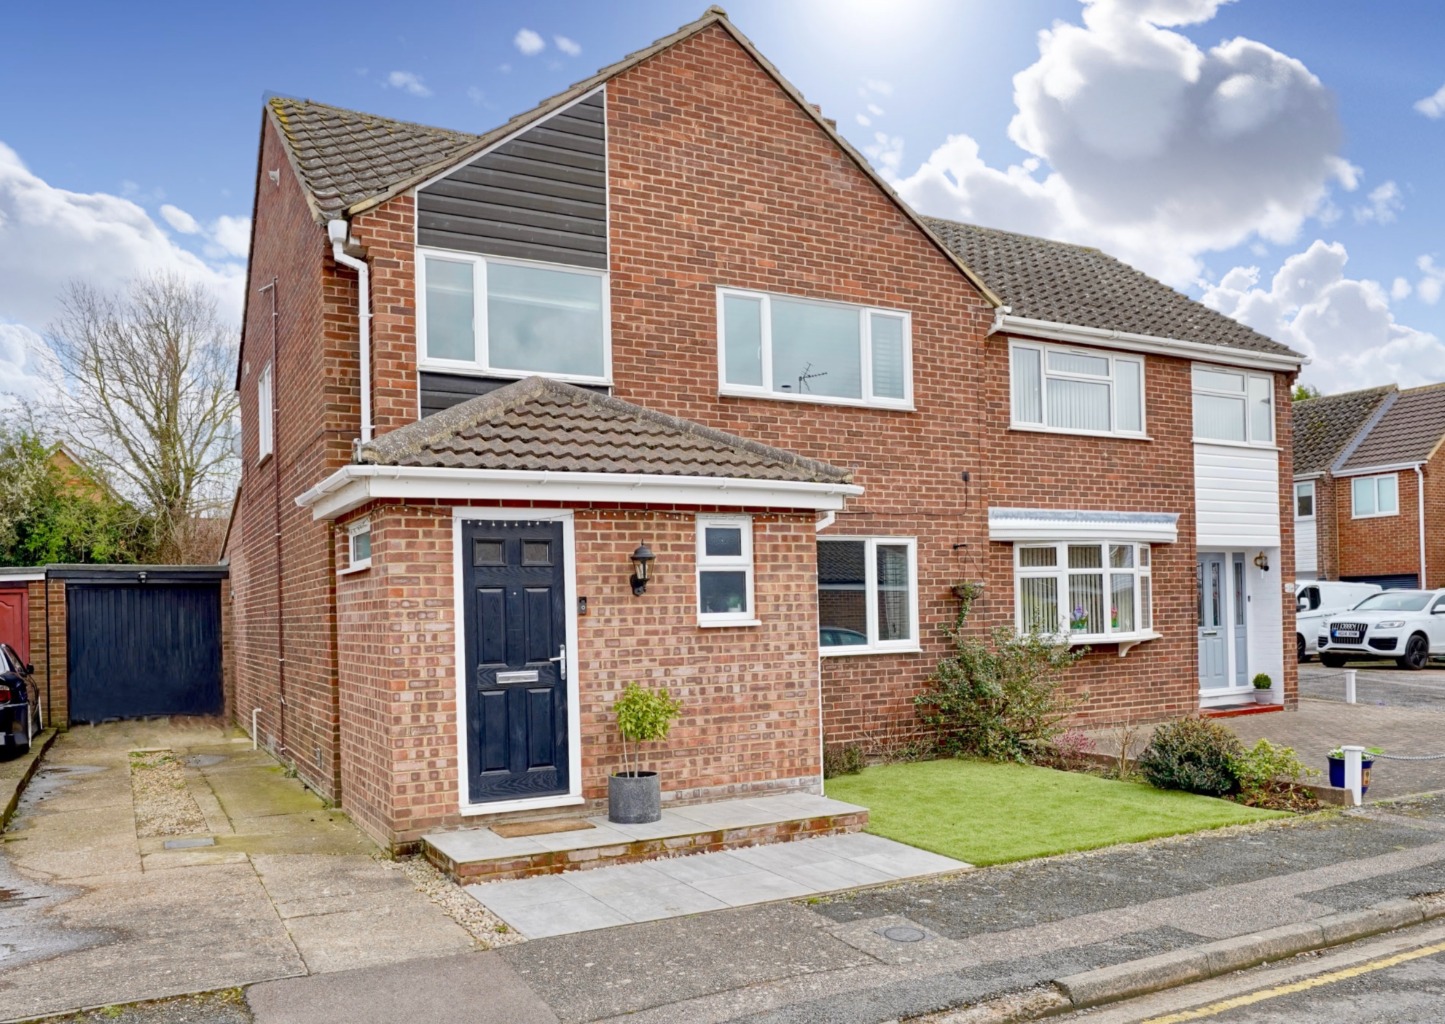 LOOKING FOR MOVE-IN READY, OPEN PLAN LIVING? Take a look at this extended three bedroom home in the ever popular ‘ Birdlands ‘ estate, situated just to the west of St Neots town centre. The location is ideal for both commuters and families, as the property is only a short walk to the main line...